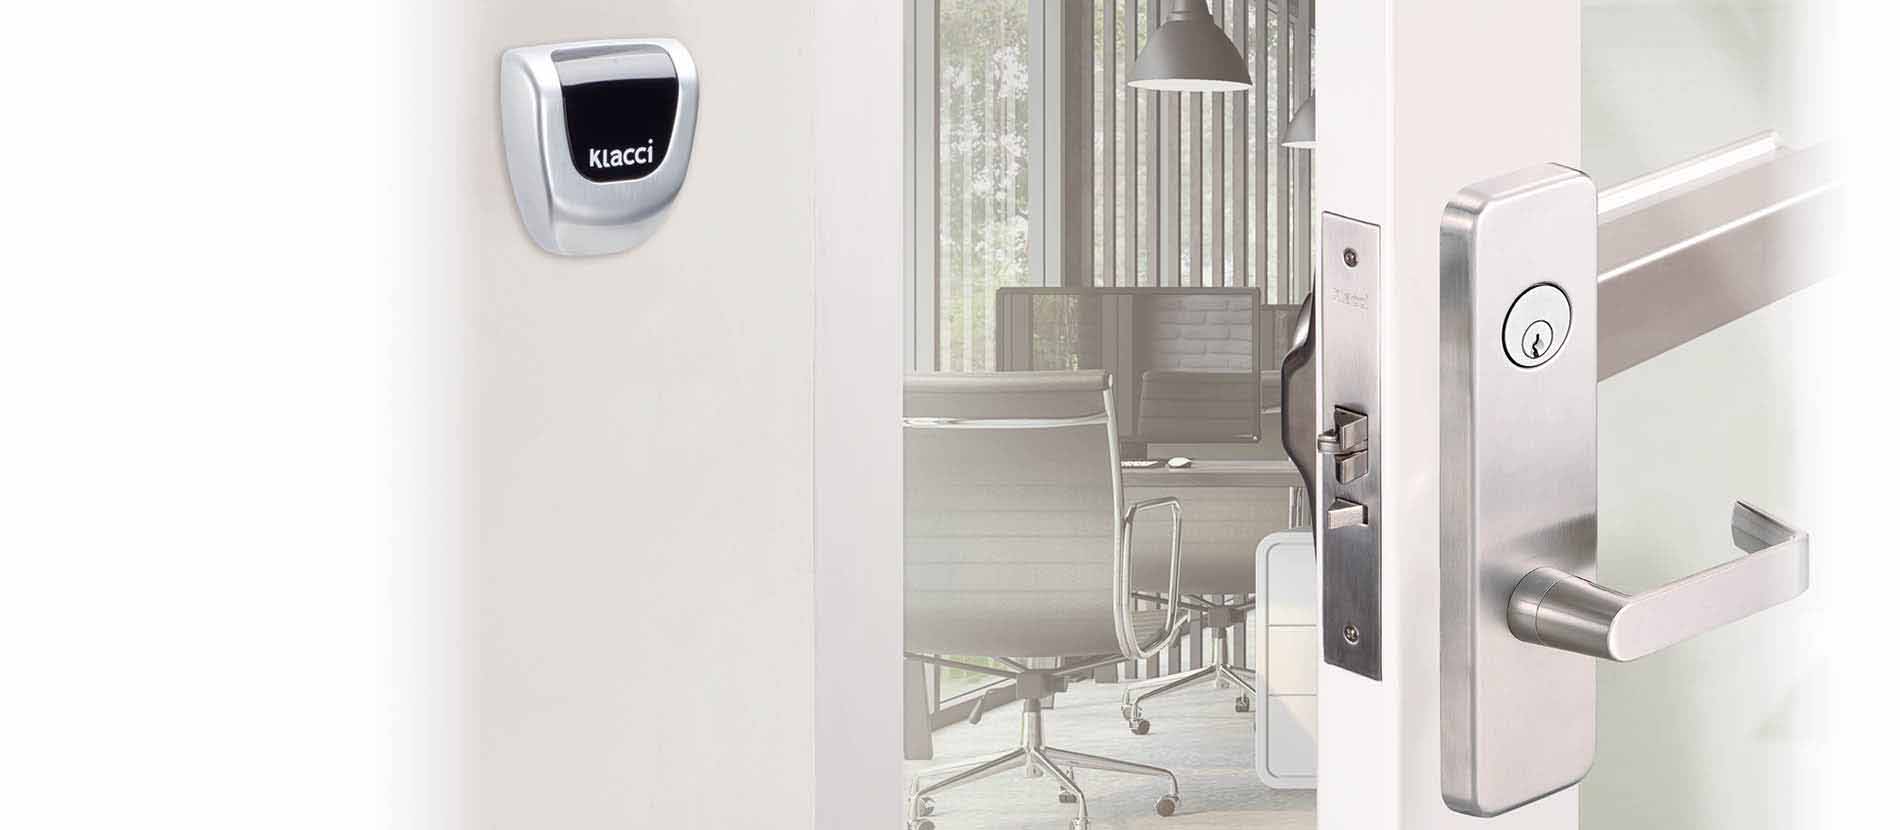 Klacci iF Series Mobile Biometrics Touchless Smart Lock - iF-R Readers office